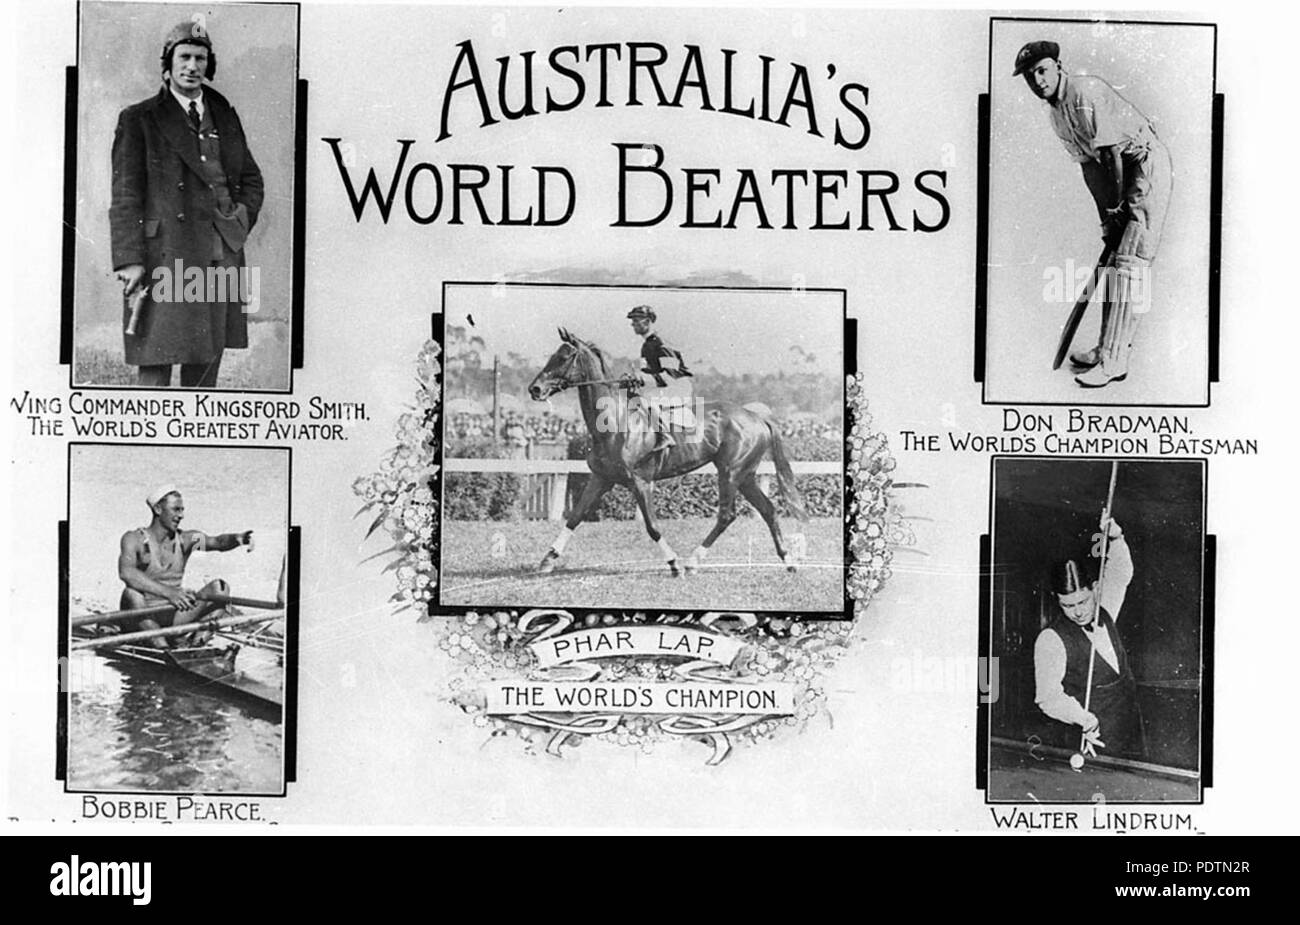 191 SLNSW 8808 A montage Australians World Beaters Charles Kingford Smith Don Bradman Bobby Pearce Walter Lindrum with Phar Lap as centre piece Stock Photo